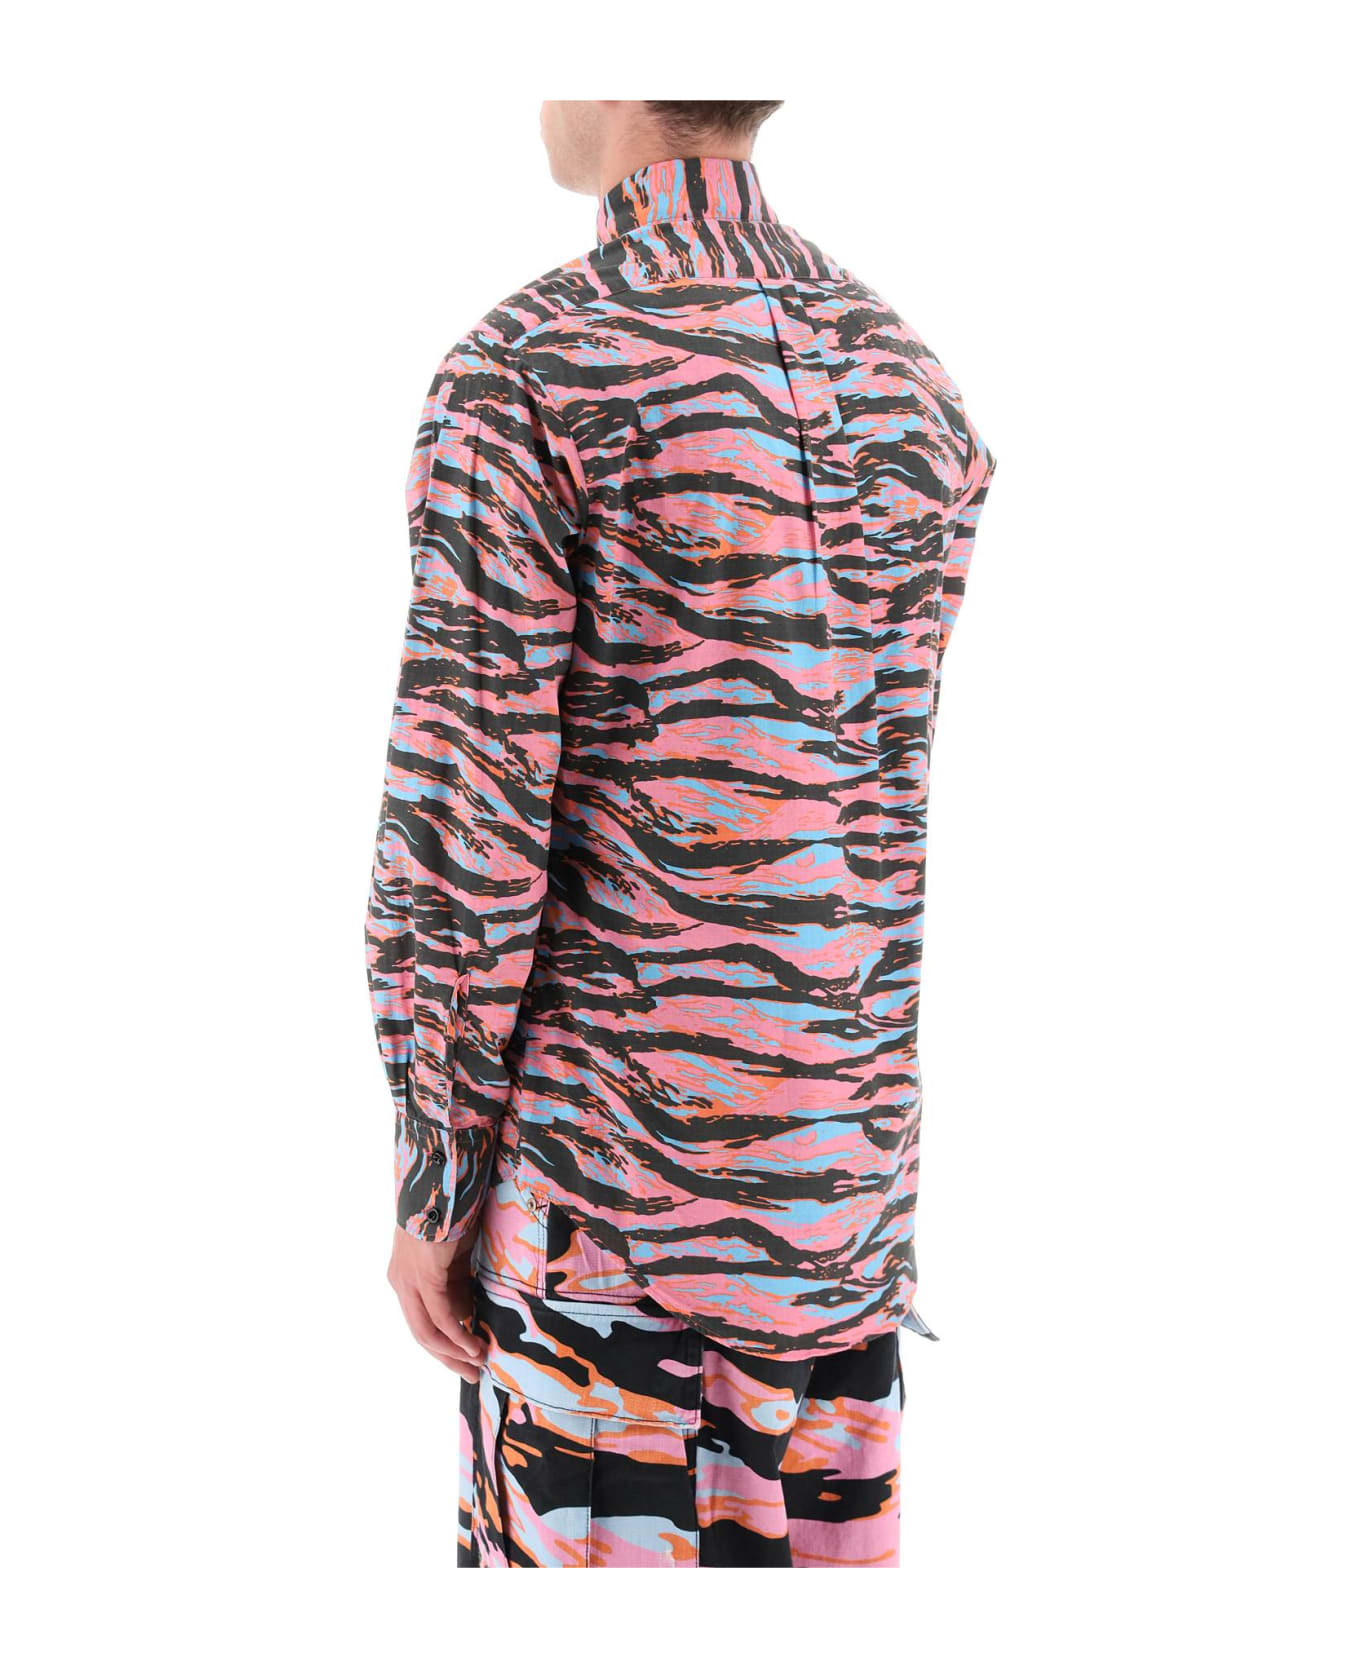 ERL Camouflage Cotton Shirt - ERL PINK RAVE CAMO 2 (Black)